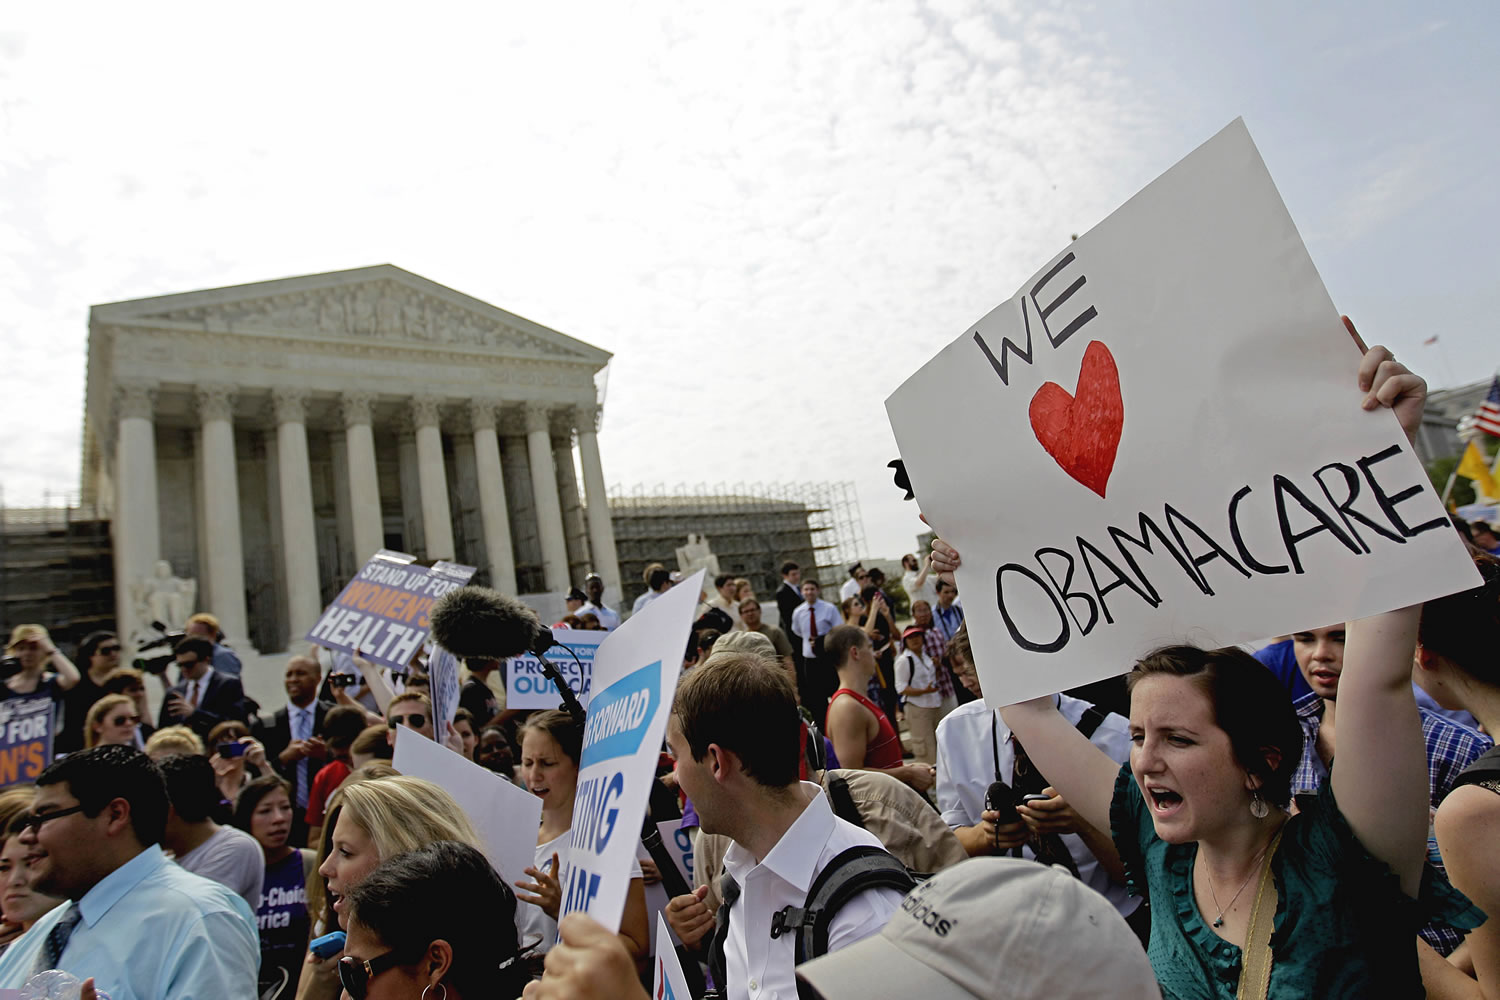 Supporters of President Barack Obama's health care law celebrate outside the Supreme Court in Washington after the court's ruling was announced last month.